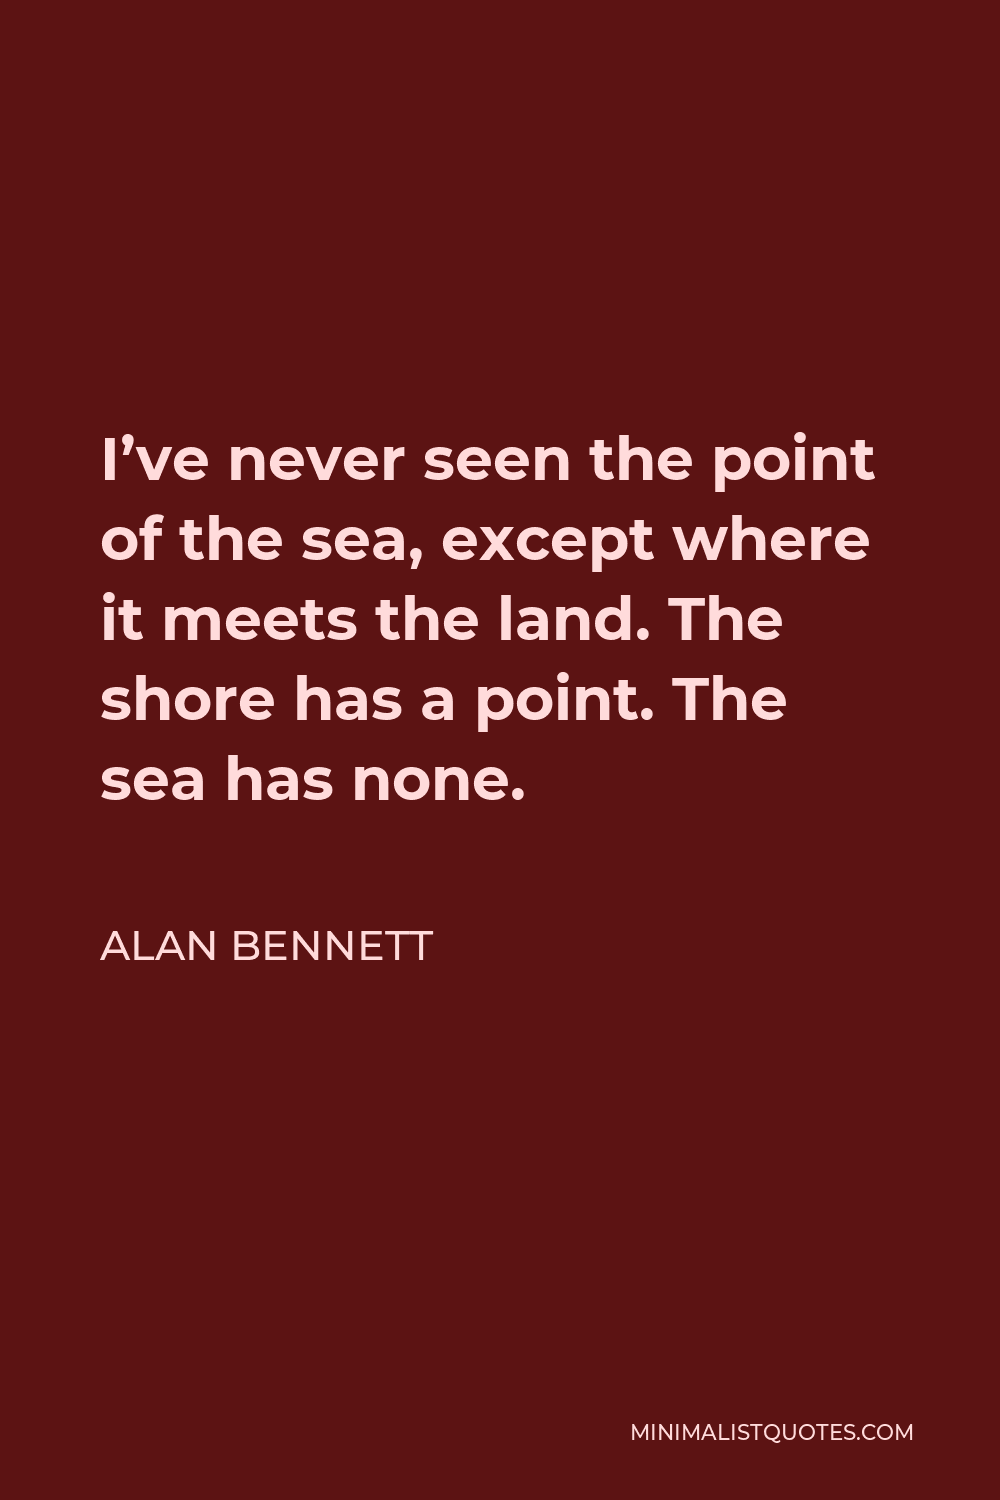 Alan Bennett Quote - I’ve never seen the point of the sea, except where it meets the land. The shore has a point. The sea has none.